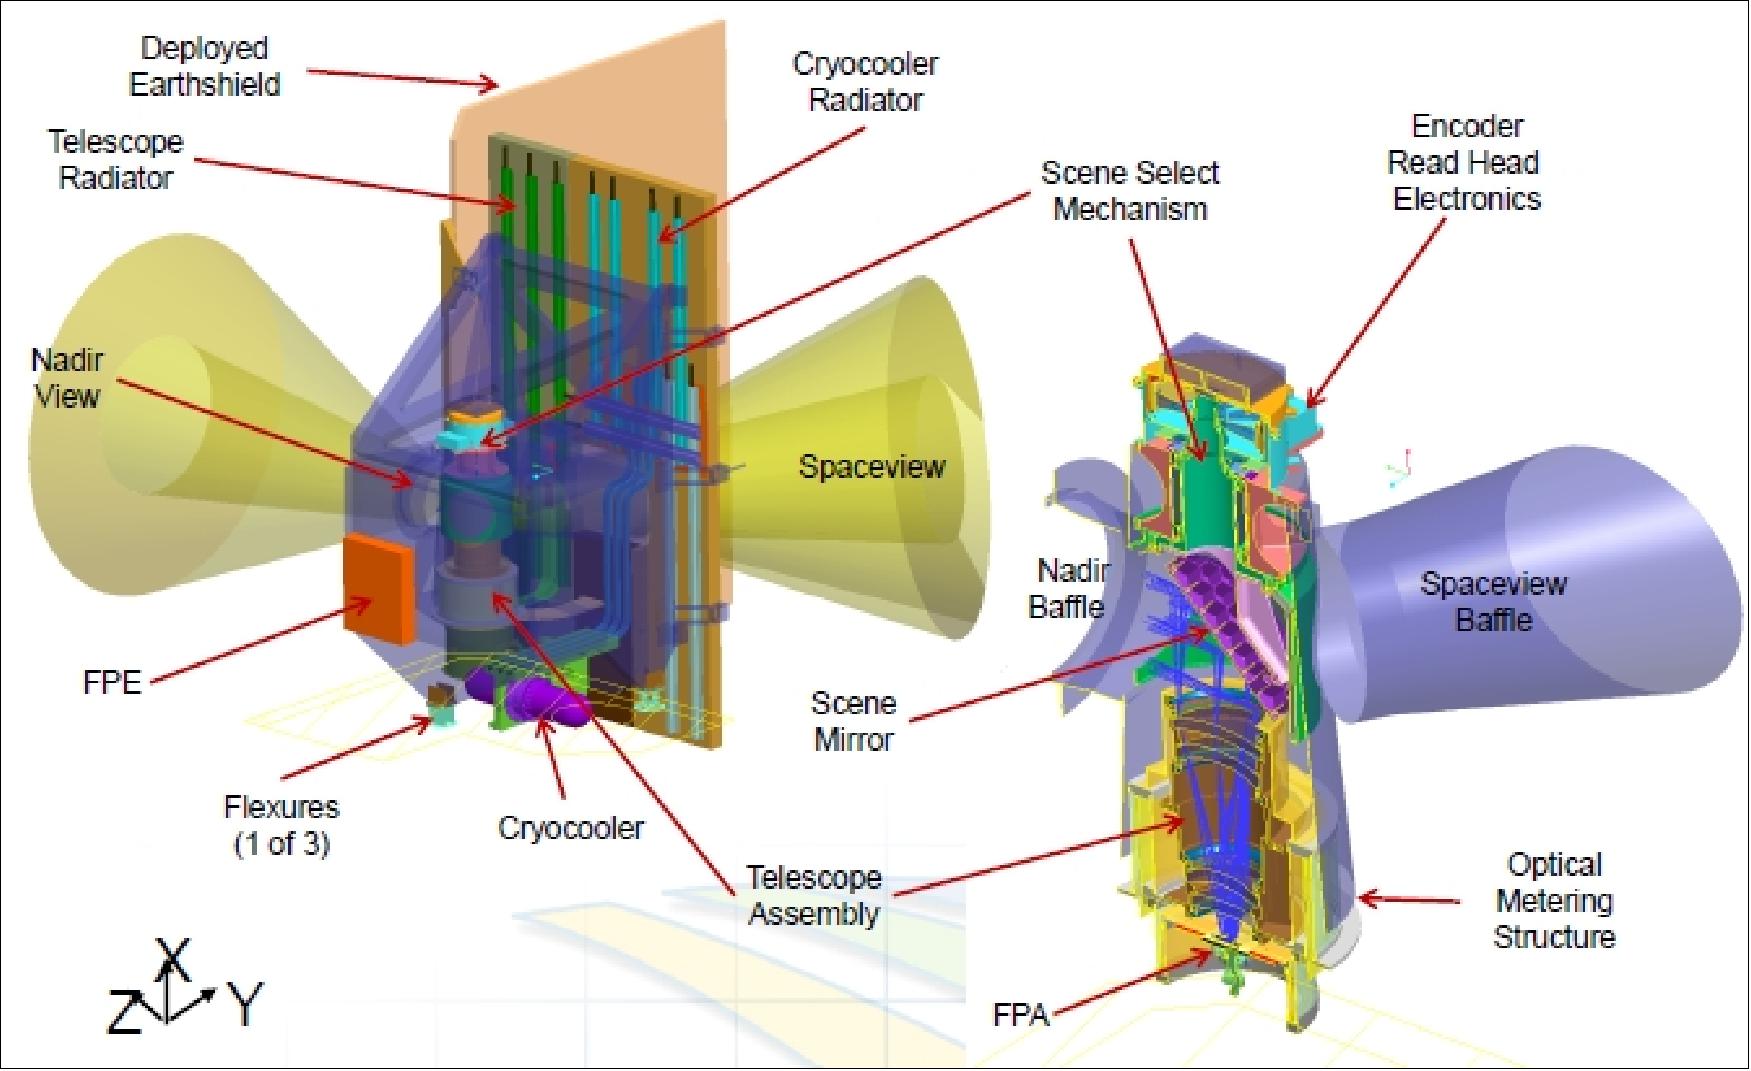 Figure 117: Schematic view of the TIRS instrument internal assembly (image credit: NASA, Ref. 95)